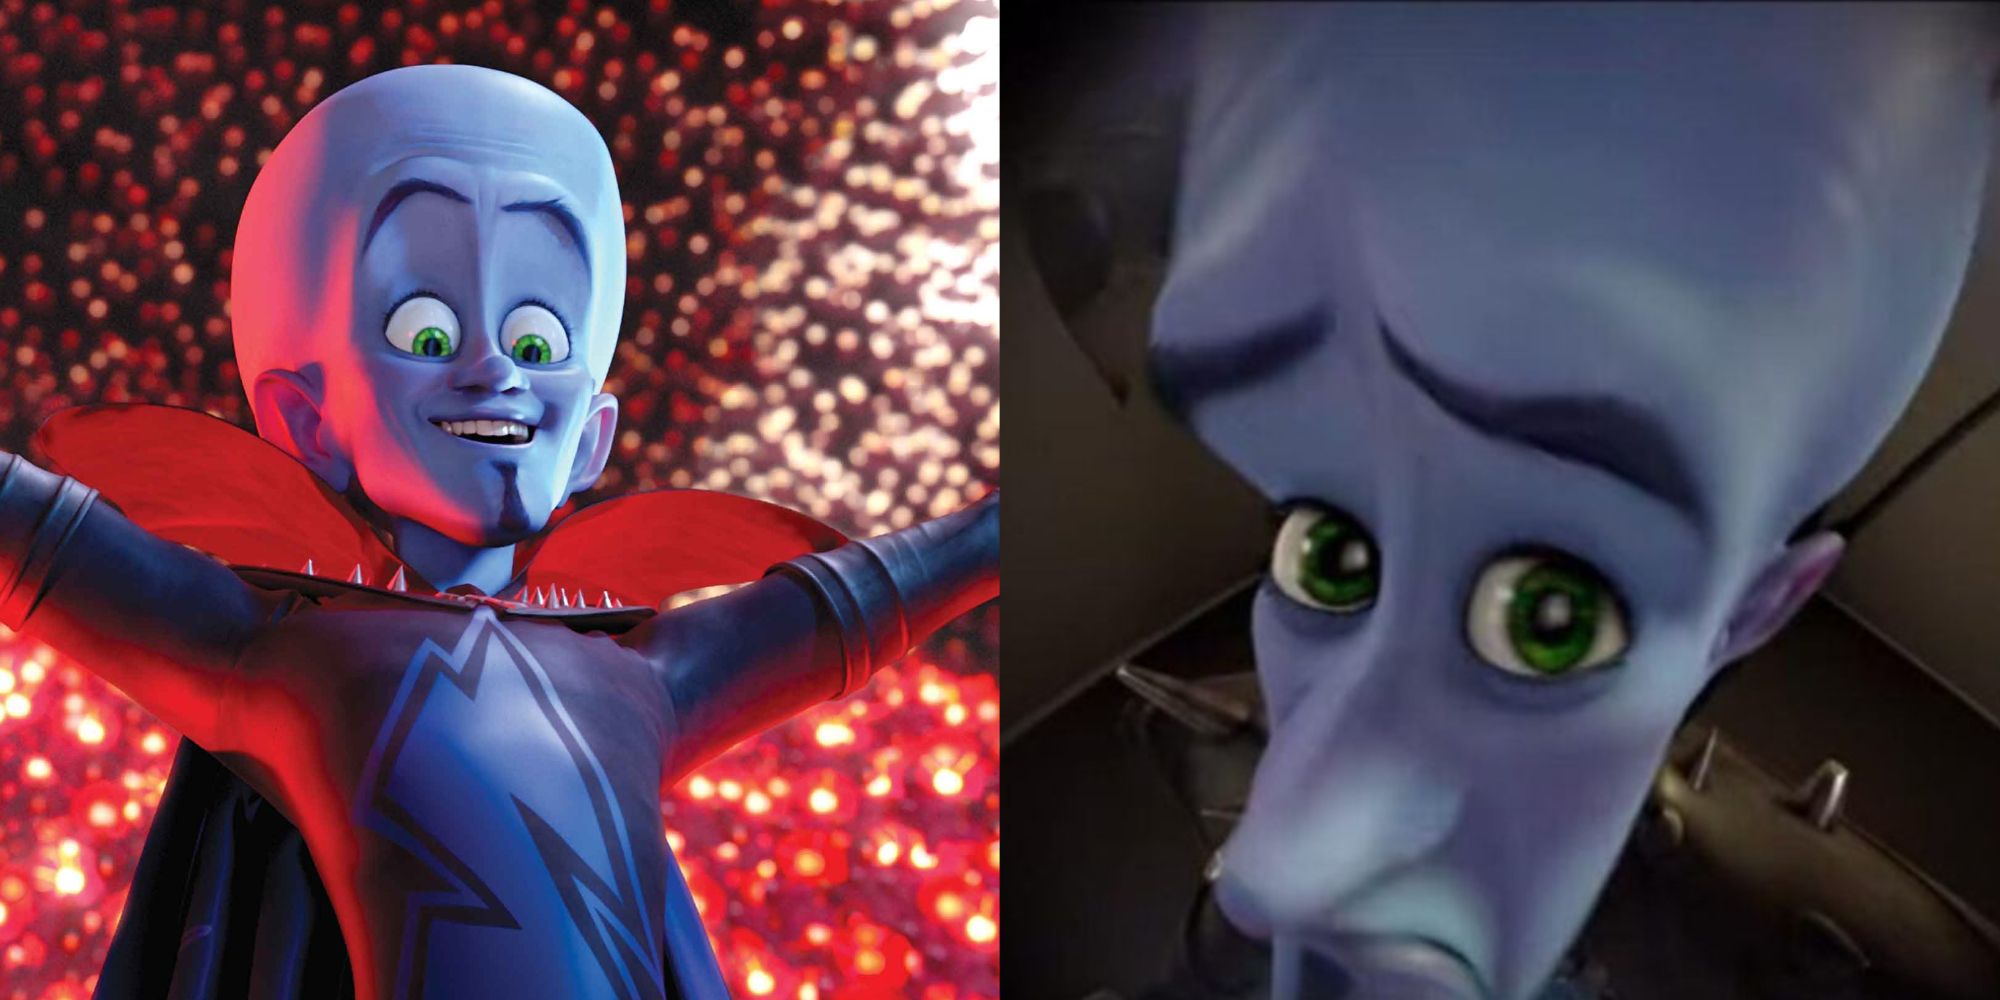 Megamind smiles while another version of himself frowns